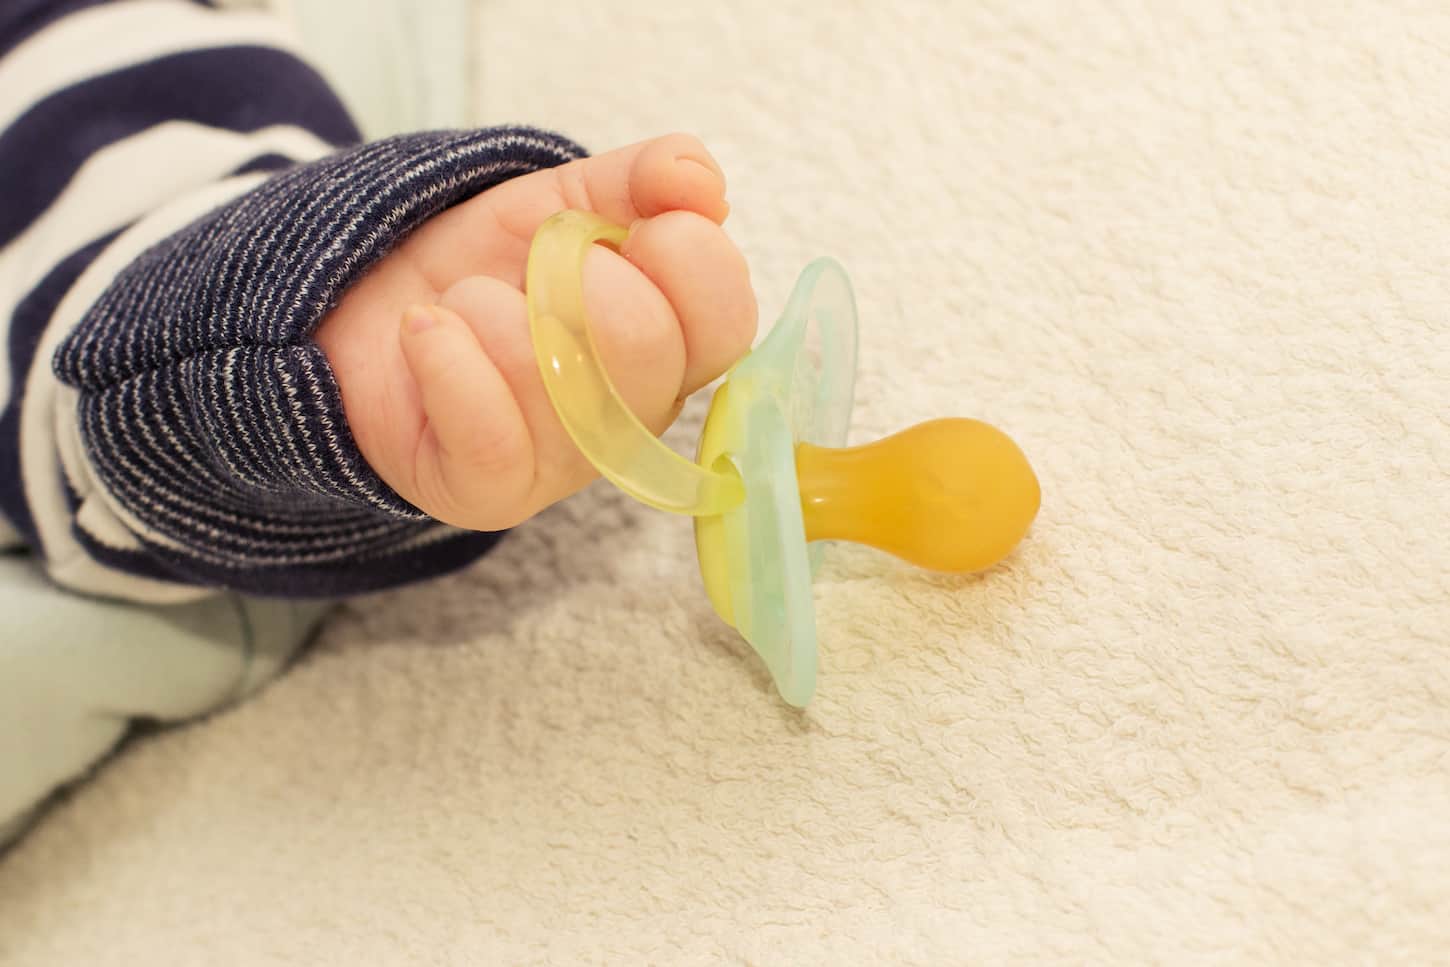 An image of a baby's little hand holding a pacifier.